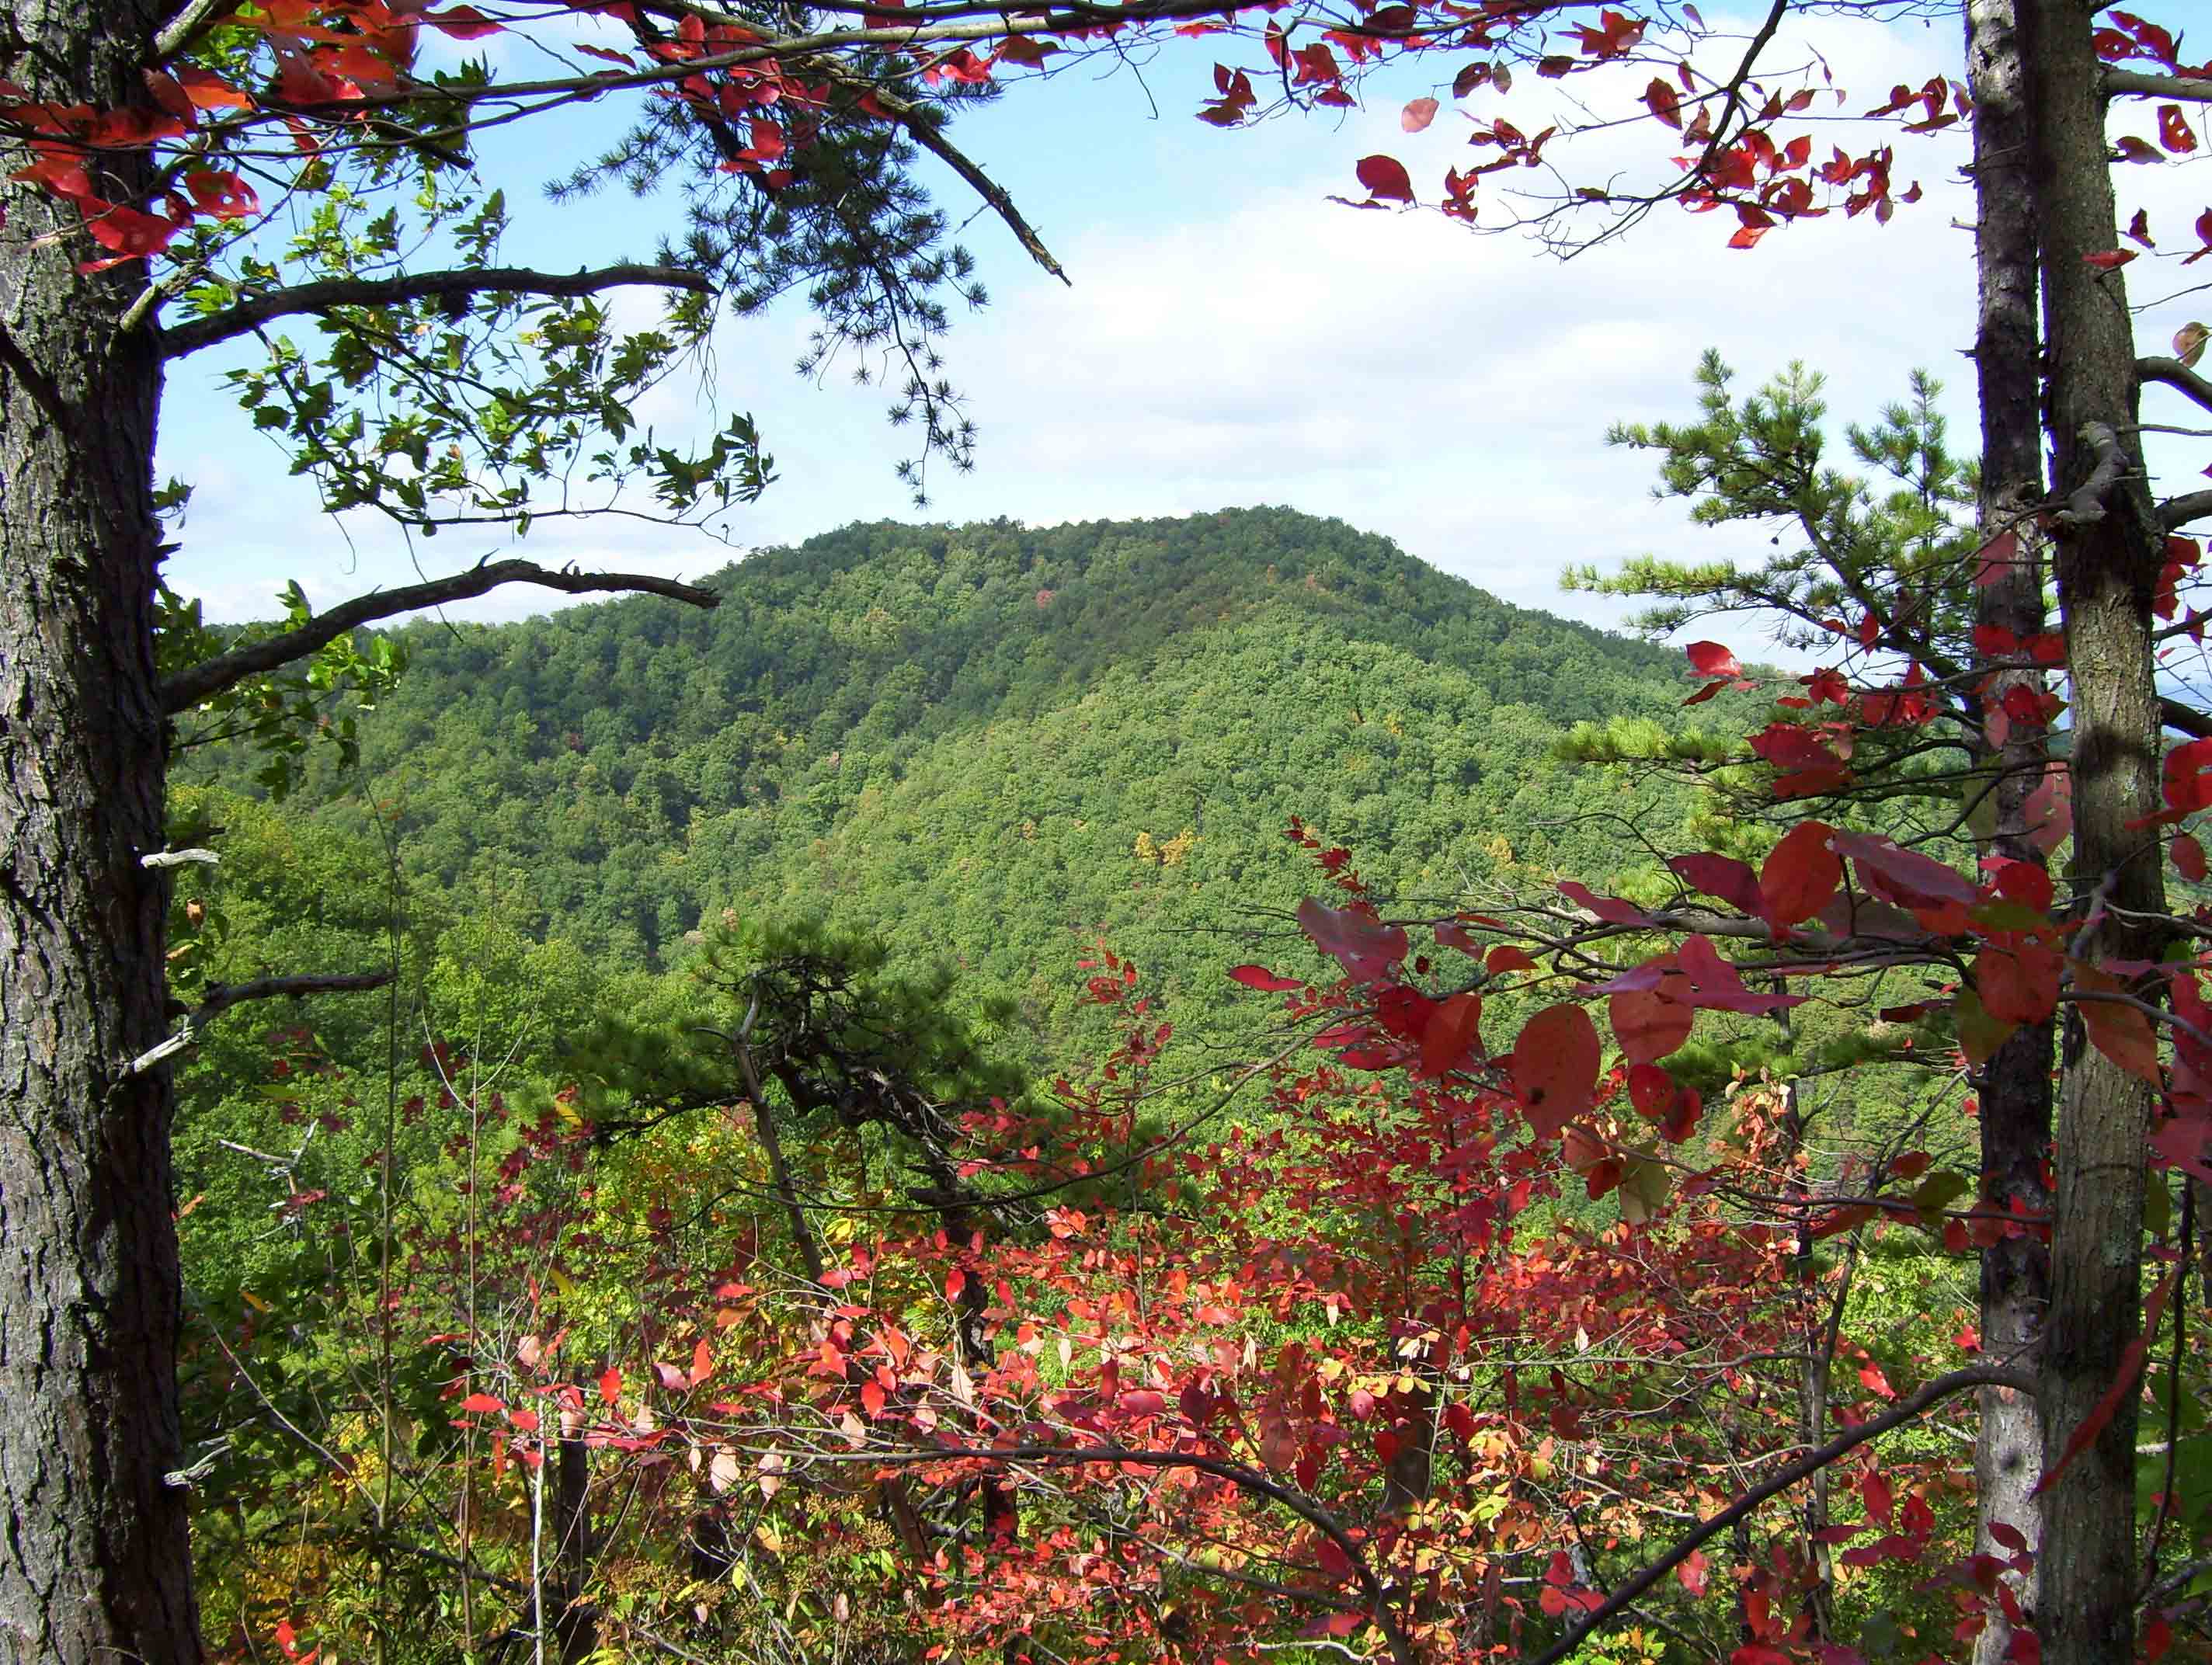 View from trail south of Salt Pond Road. From the map, the mountain must be Flat Top Mt. This is not the more famous Flat Top that is one of the Peaks of Otter further north.  Courtesy dlcul@conncoll.edu